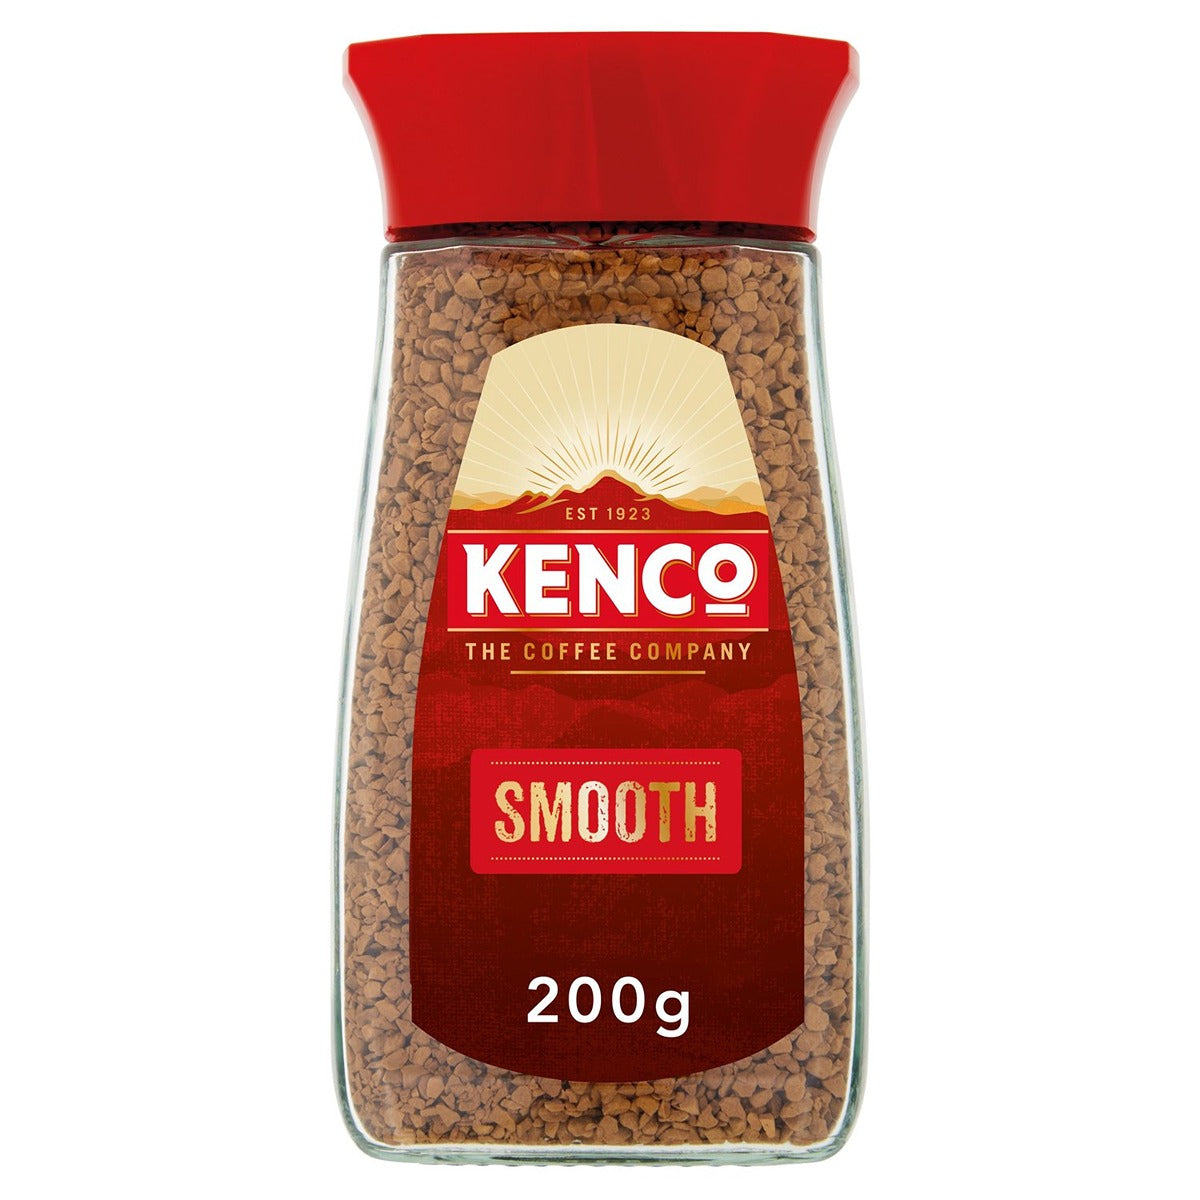 Kenco - Smooth Instant Coffee - 200g.